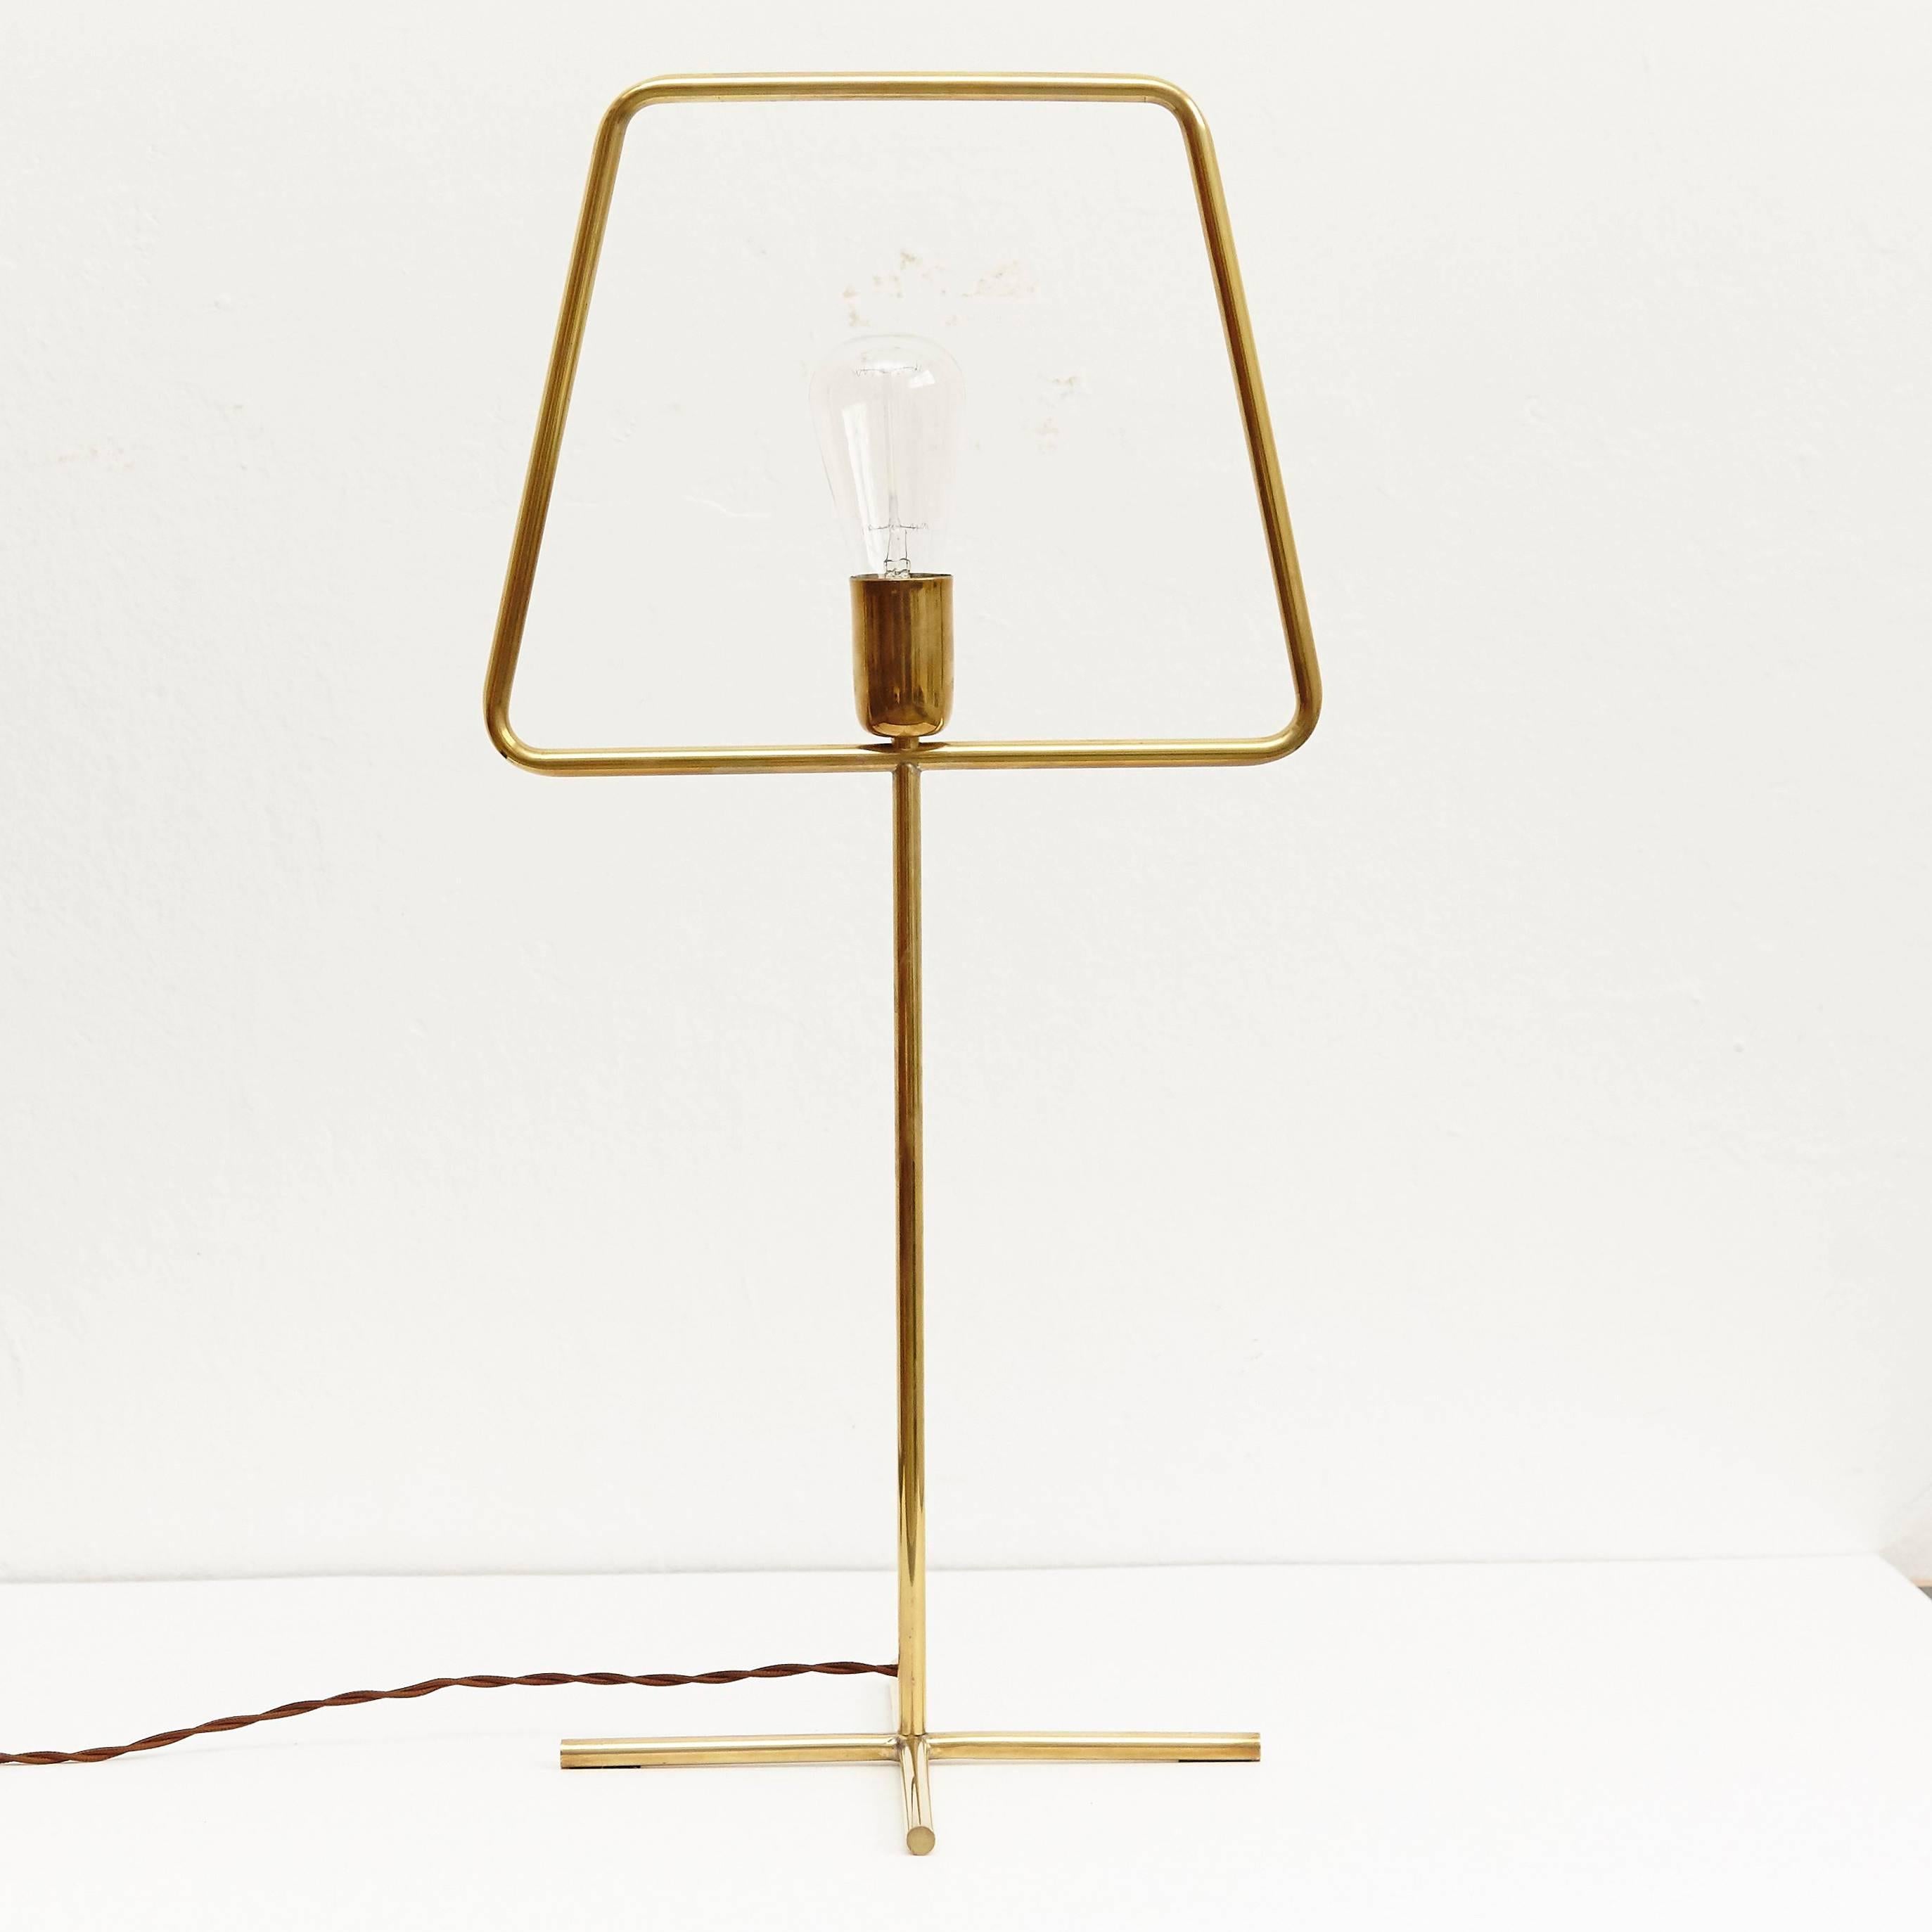 Slim brass is a handmade brass table lamp. It's a special edition of the slim collection with a unique added look.

This lamp is a prototype therefore it's a unique piece.

Designed by Adolfo Abejon (Barcelona).

Adolfo Abejon is the meeting